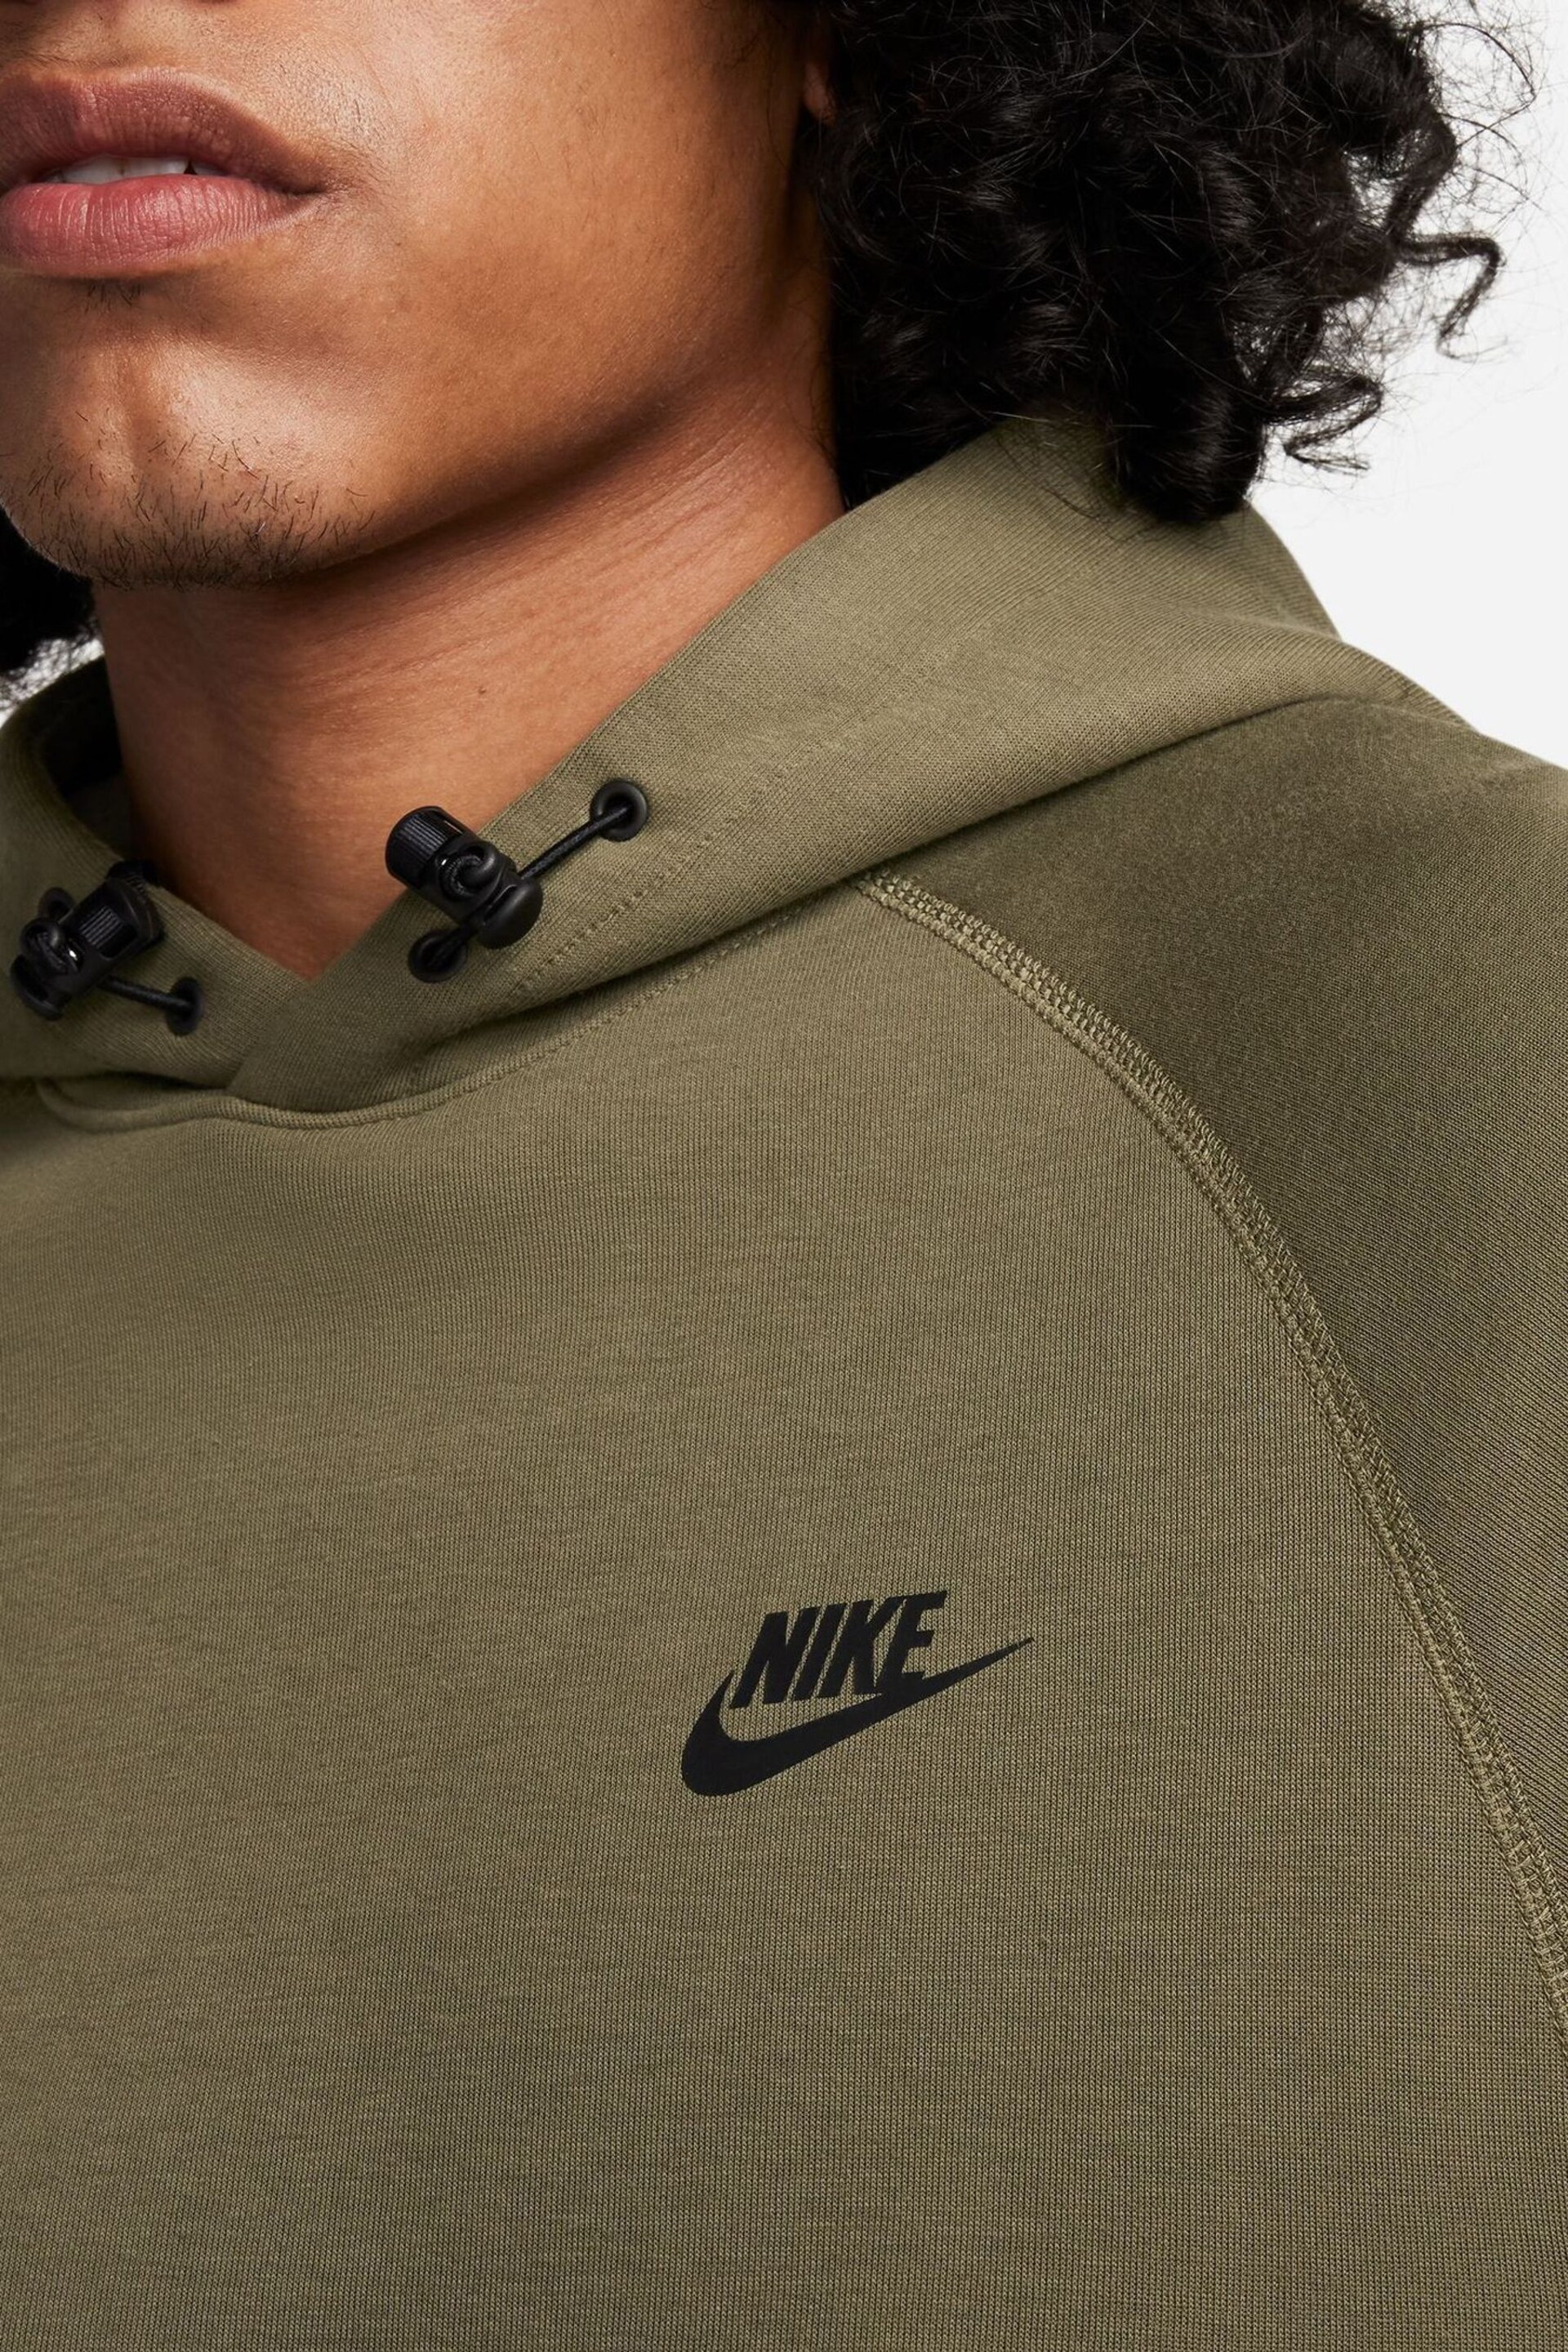 Nike Olive Green Tech Fleece Pullover Hoodie - Image 11 of 17